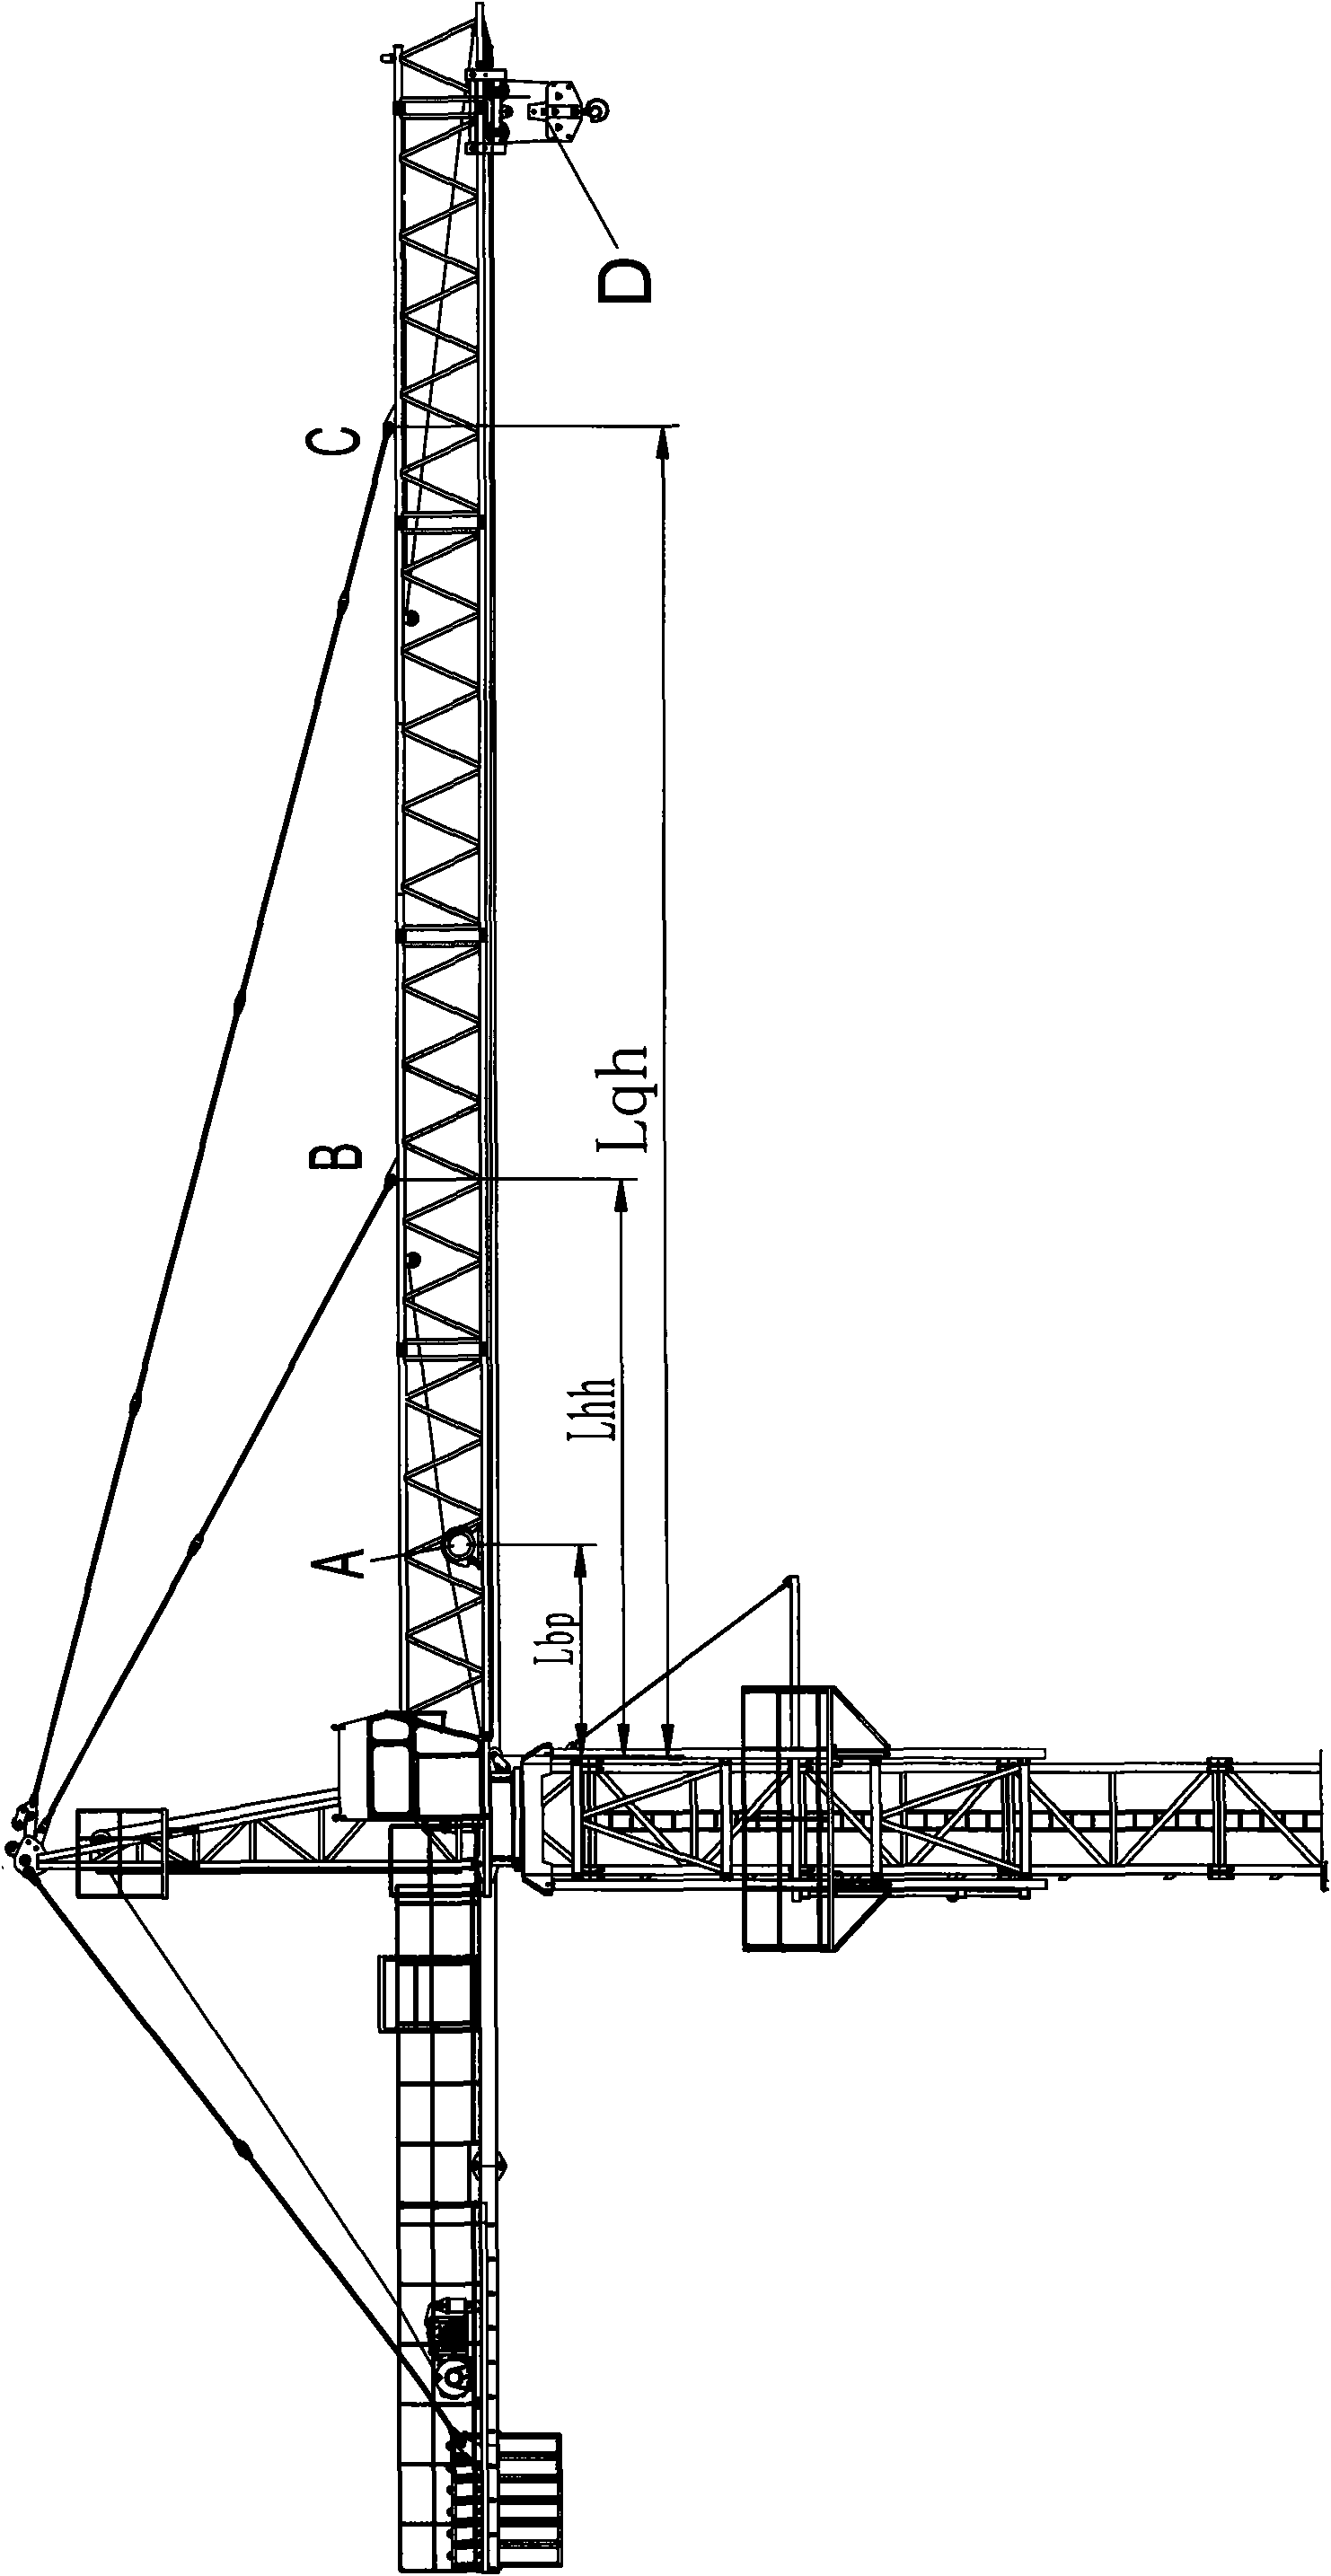 Measuring method of towercrane crane jib structural distortion and stress